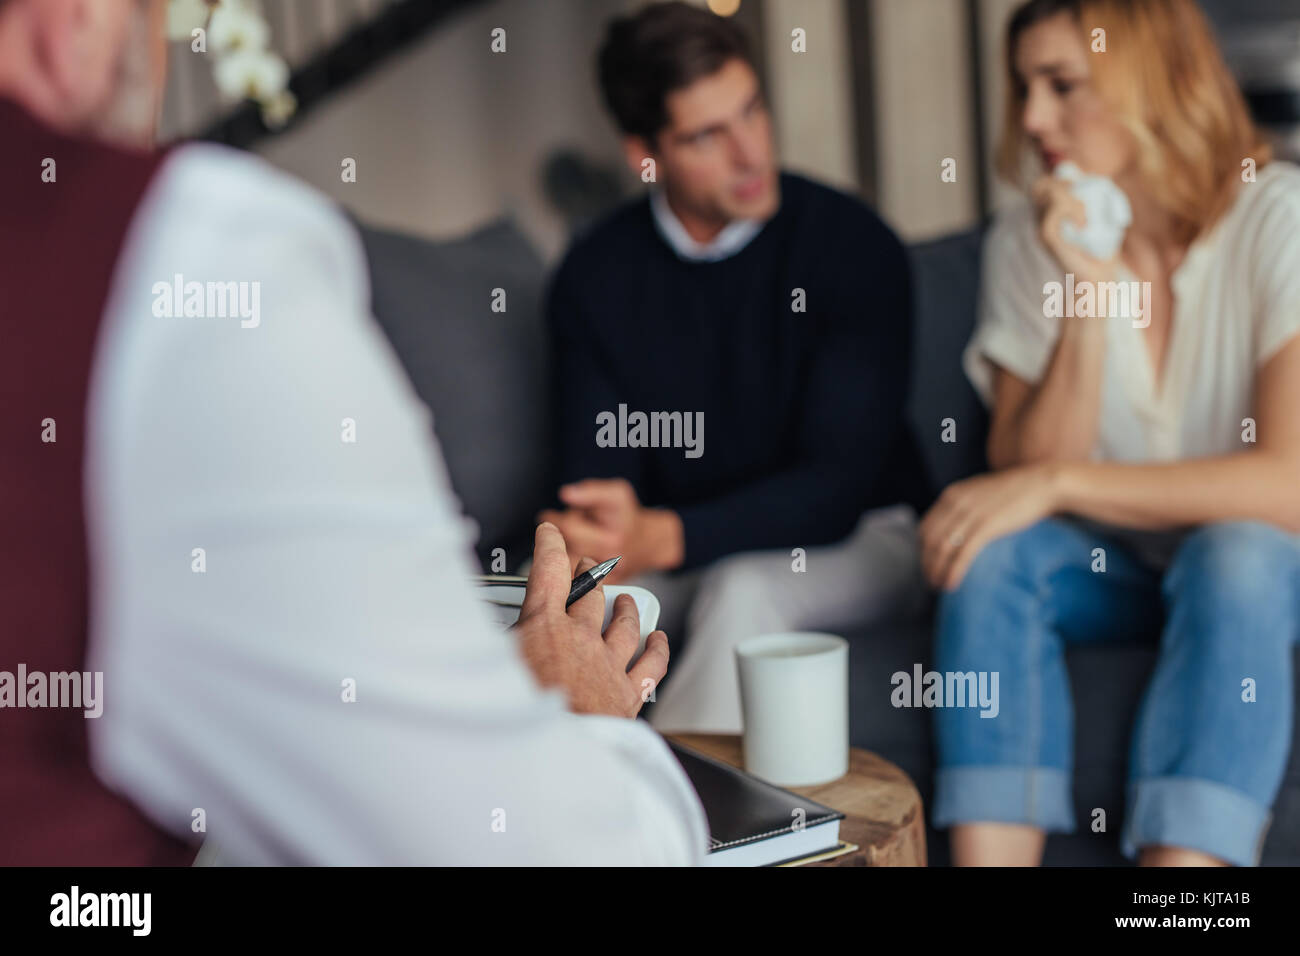 Psychologist consulting young couple in trouble. Psychotherapist taking down notes during counseling session. Stock Photo